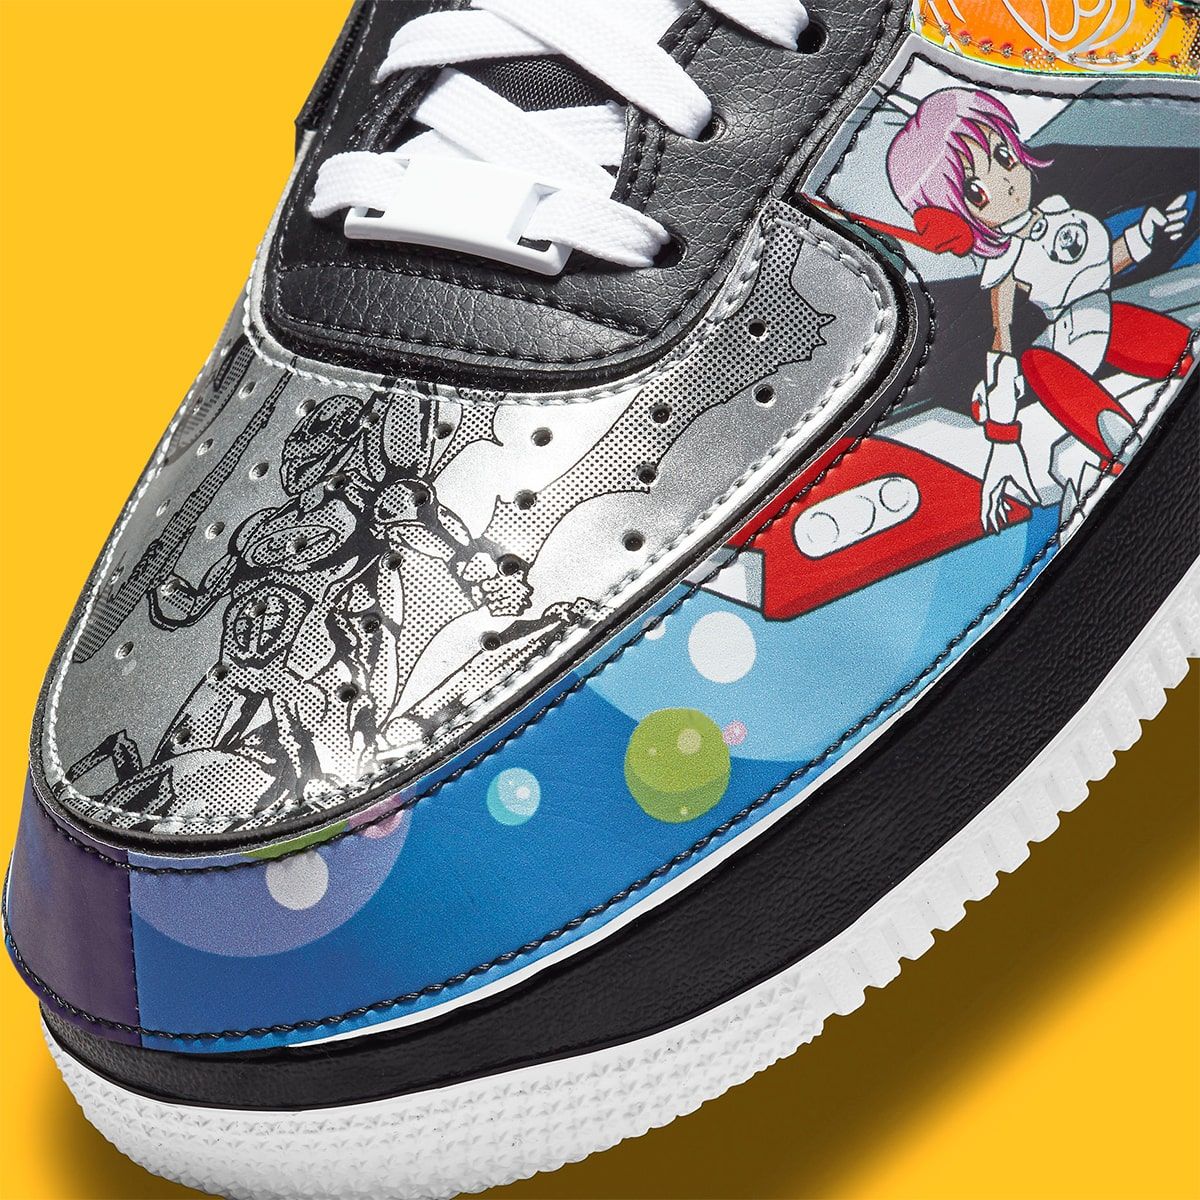 Official Looks at the Anime-Inspired AF 1/1 